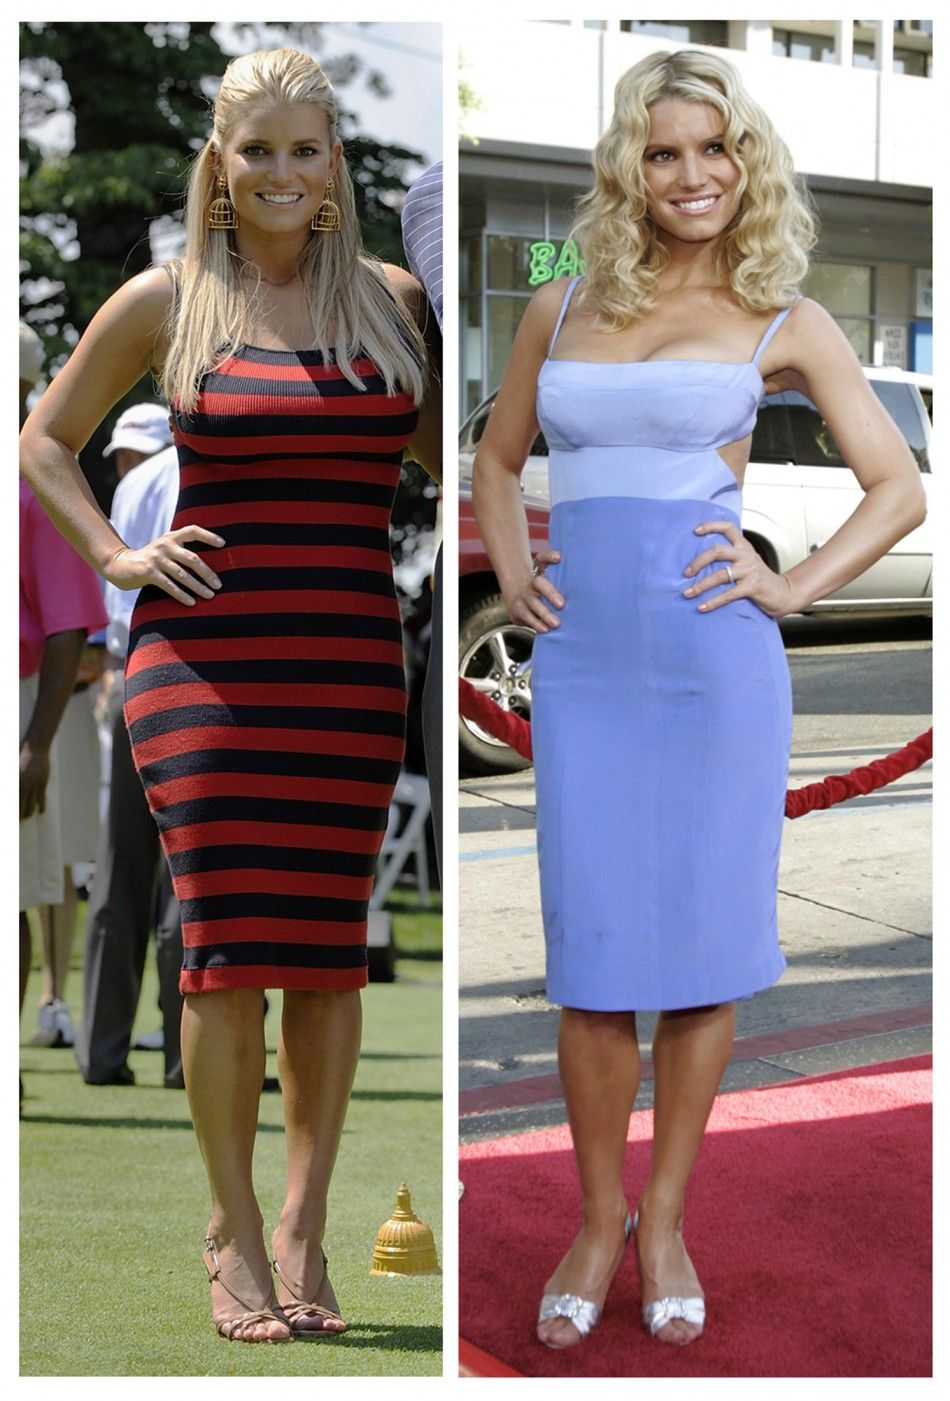 Combination photo of Jessica Simpson at 2009 ATT golf tournament in Bethesda and at 2005 Duke of Hazzard premiere in Hollywood